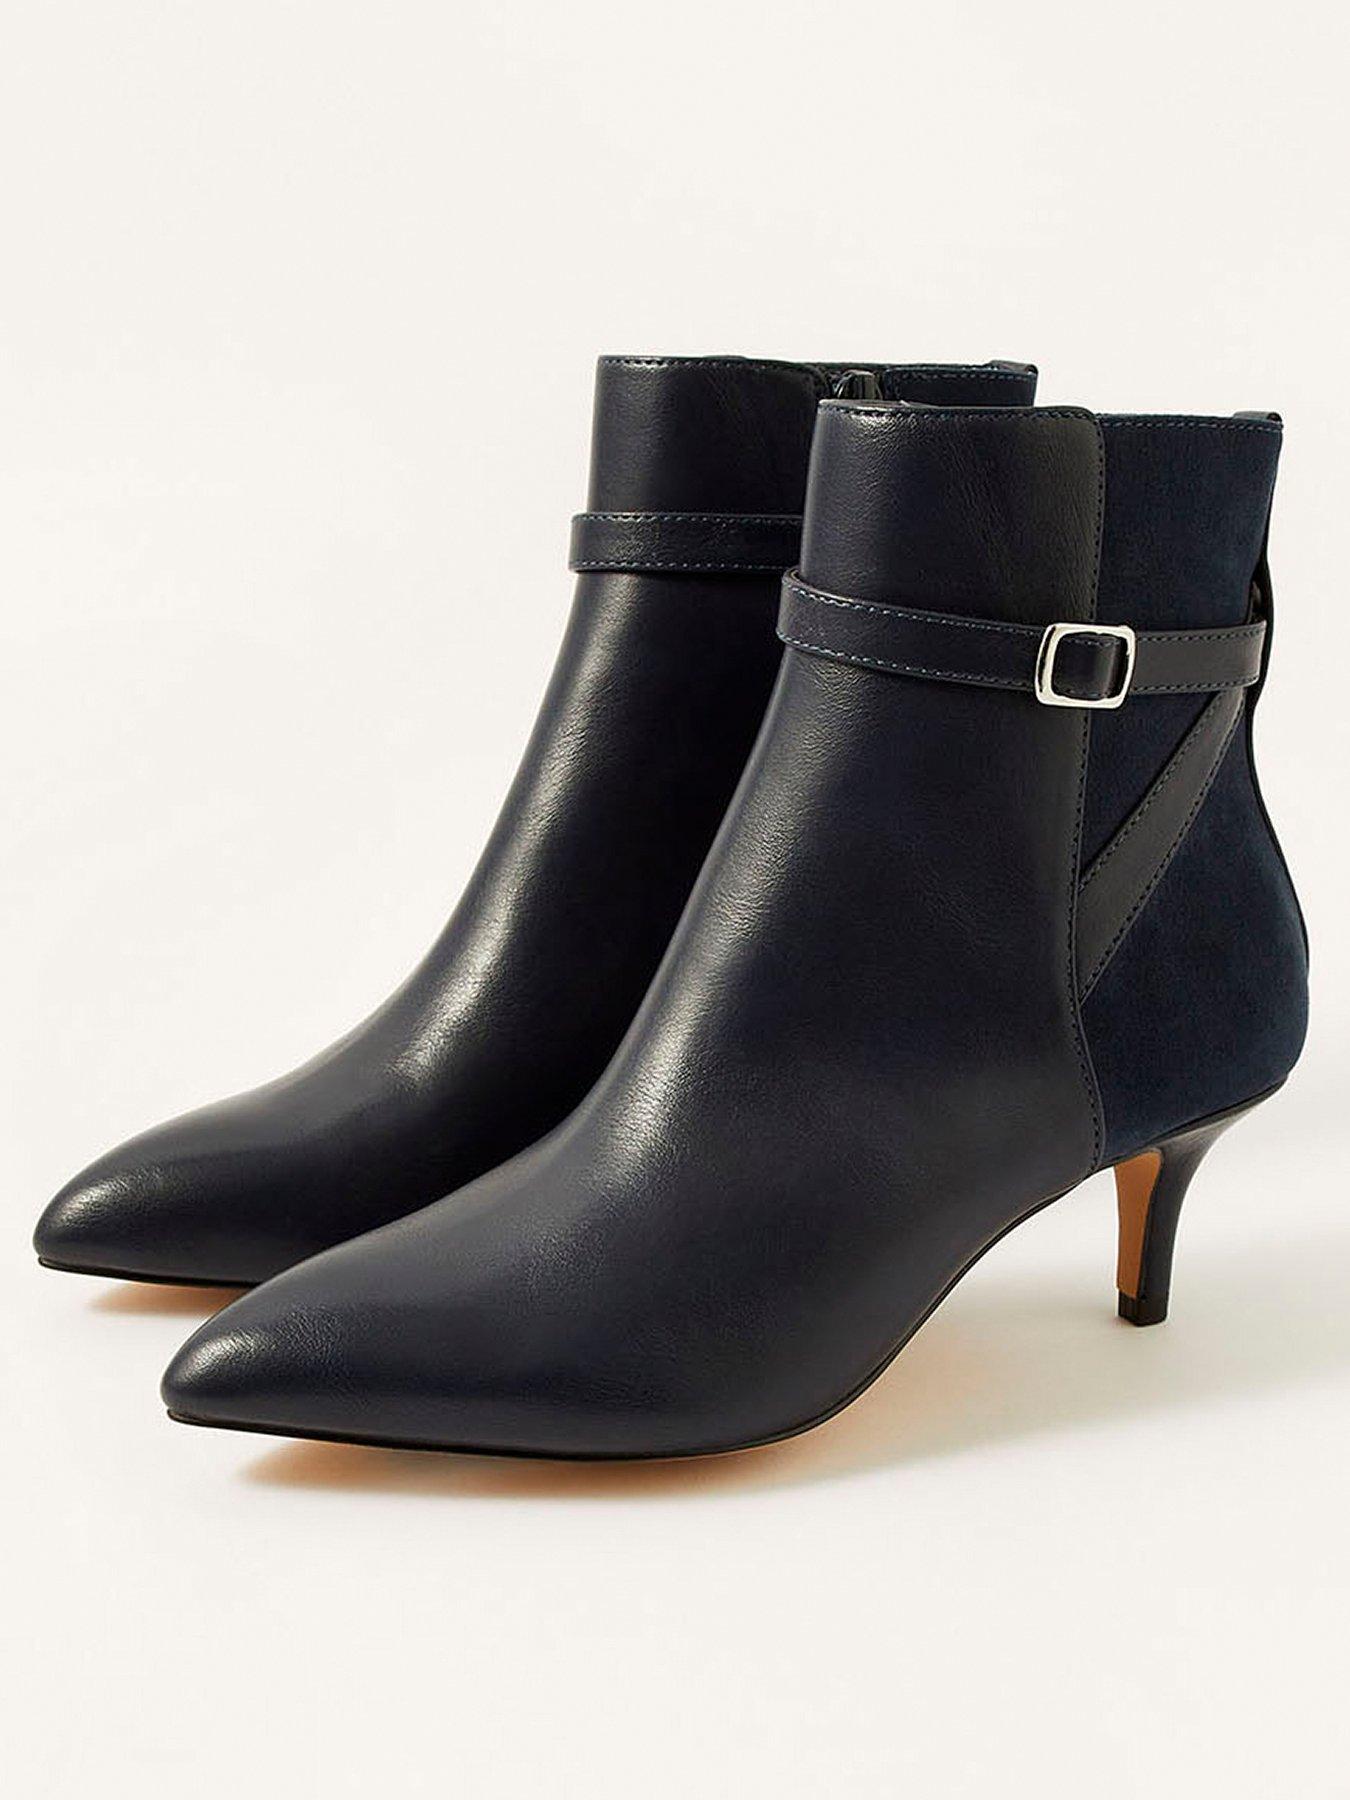 Details about   Women ankle booties 